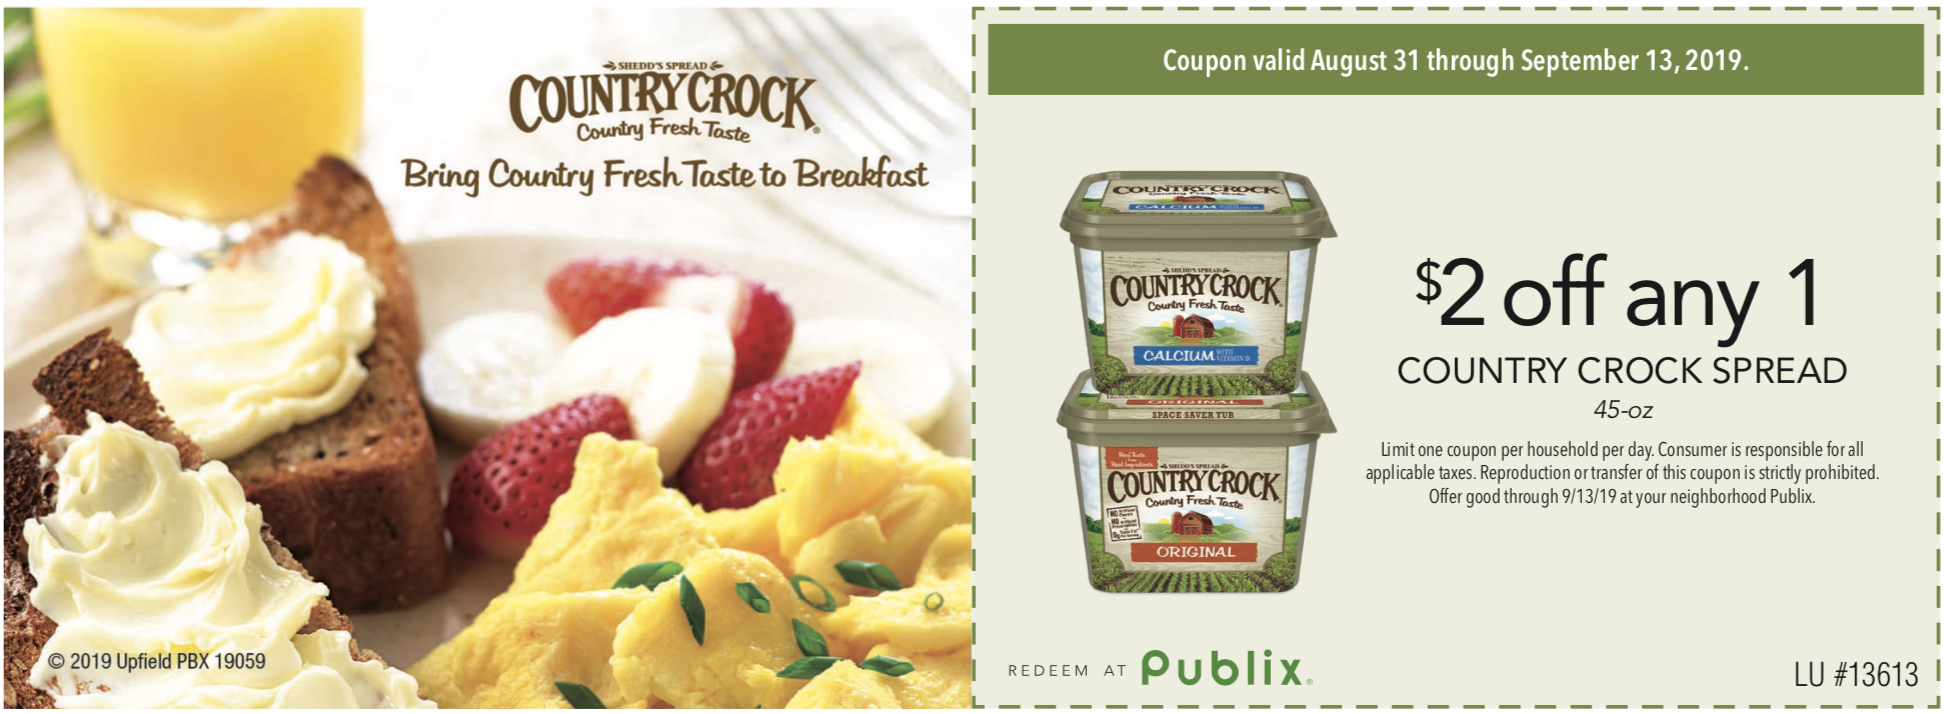 Big Tub Of Country Crock Spread Just $1.99 At Publix - Less Than Half Price! on I Heart Publix